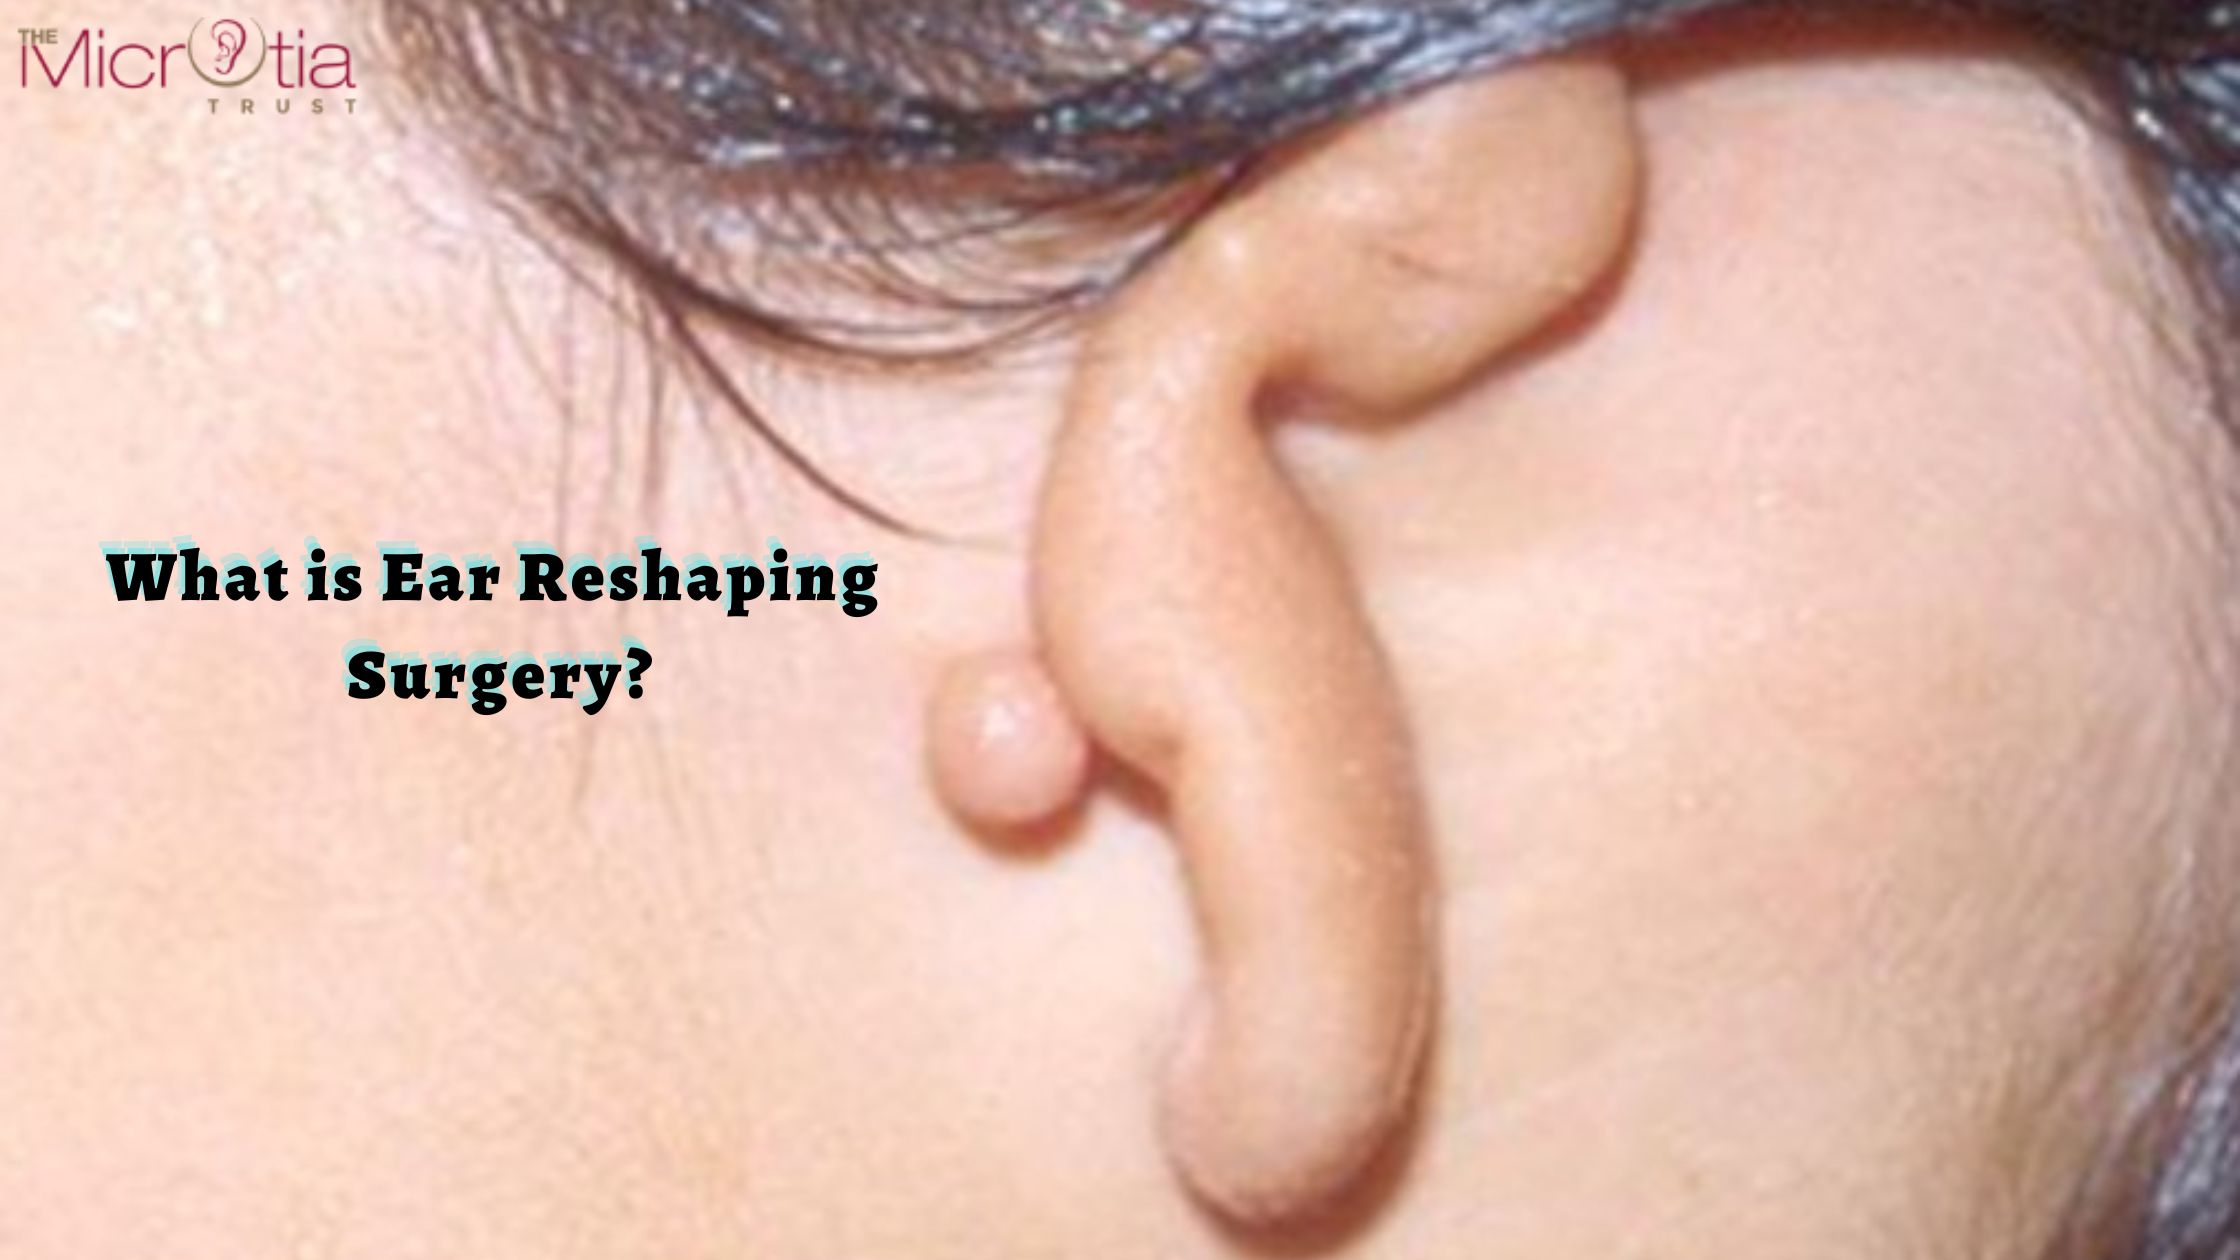 What is Ear Reshaping Surgery